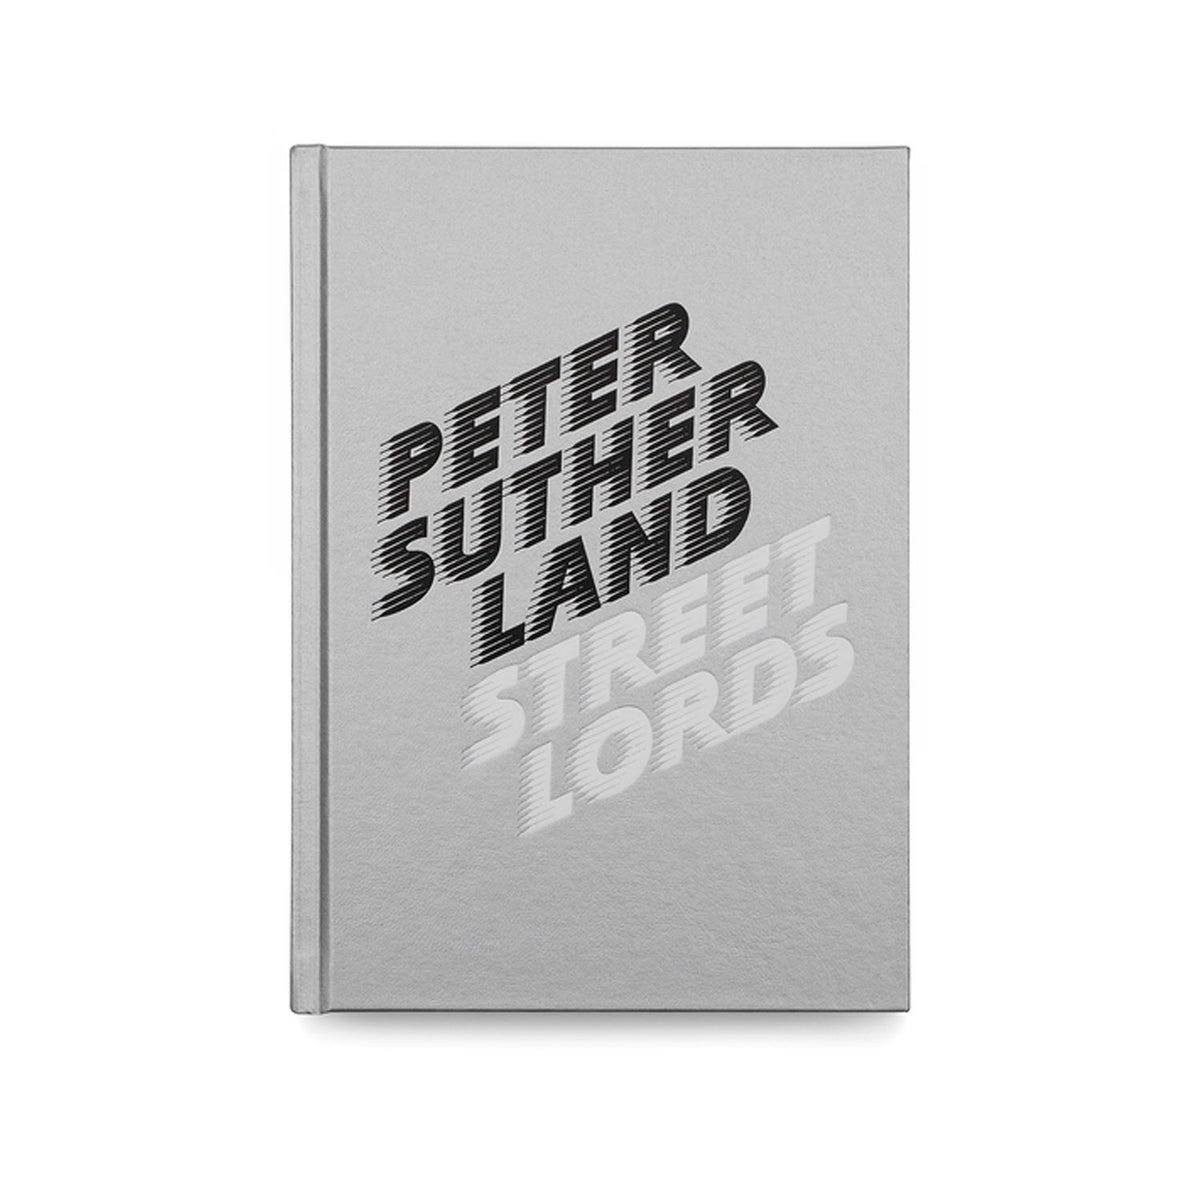 h227×w162mmPETER SUTHERLAND / STREET LORDS - アート・デザイン・音楽